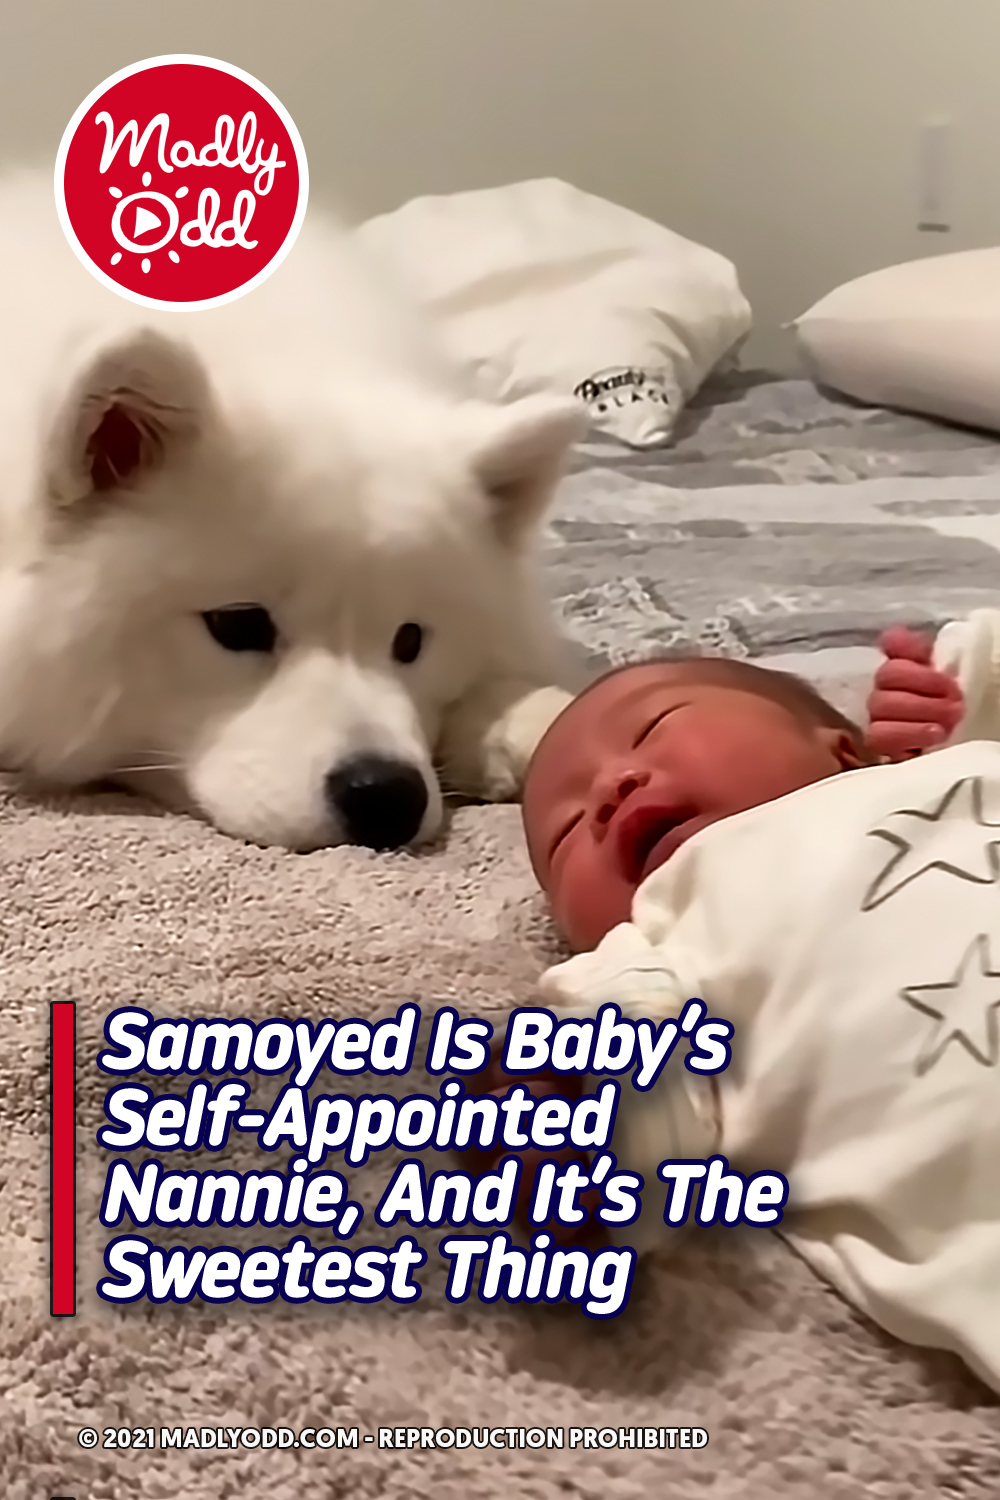 Samoyed Is Baby’s Self-Appointed Nannie, And It’s The Sweetest Thing